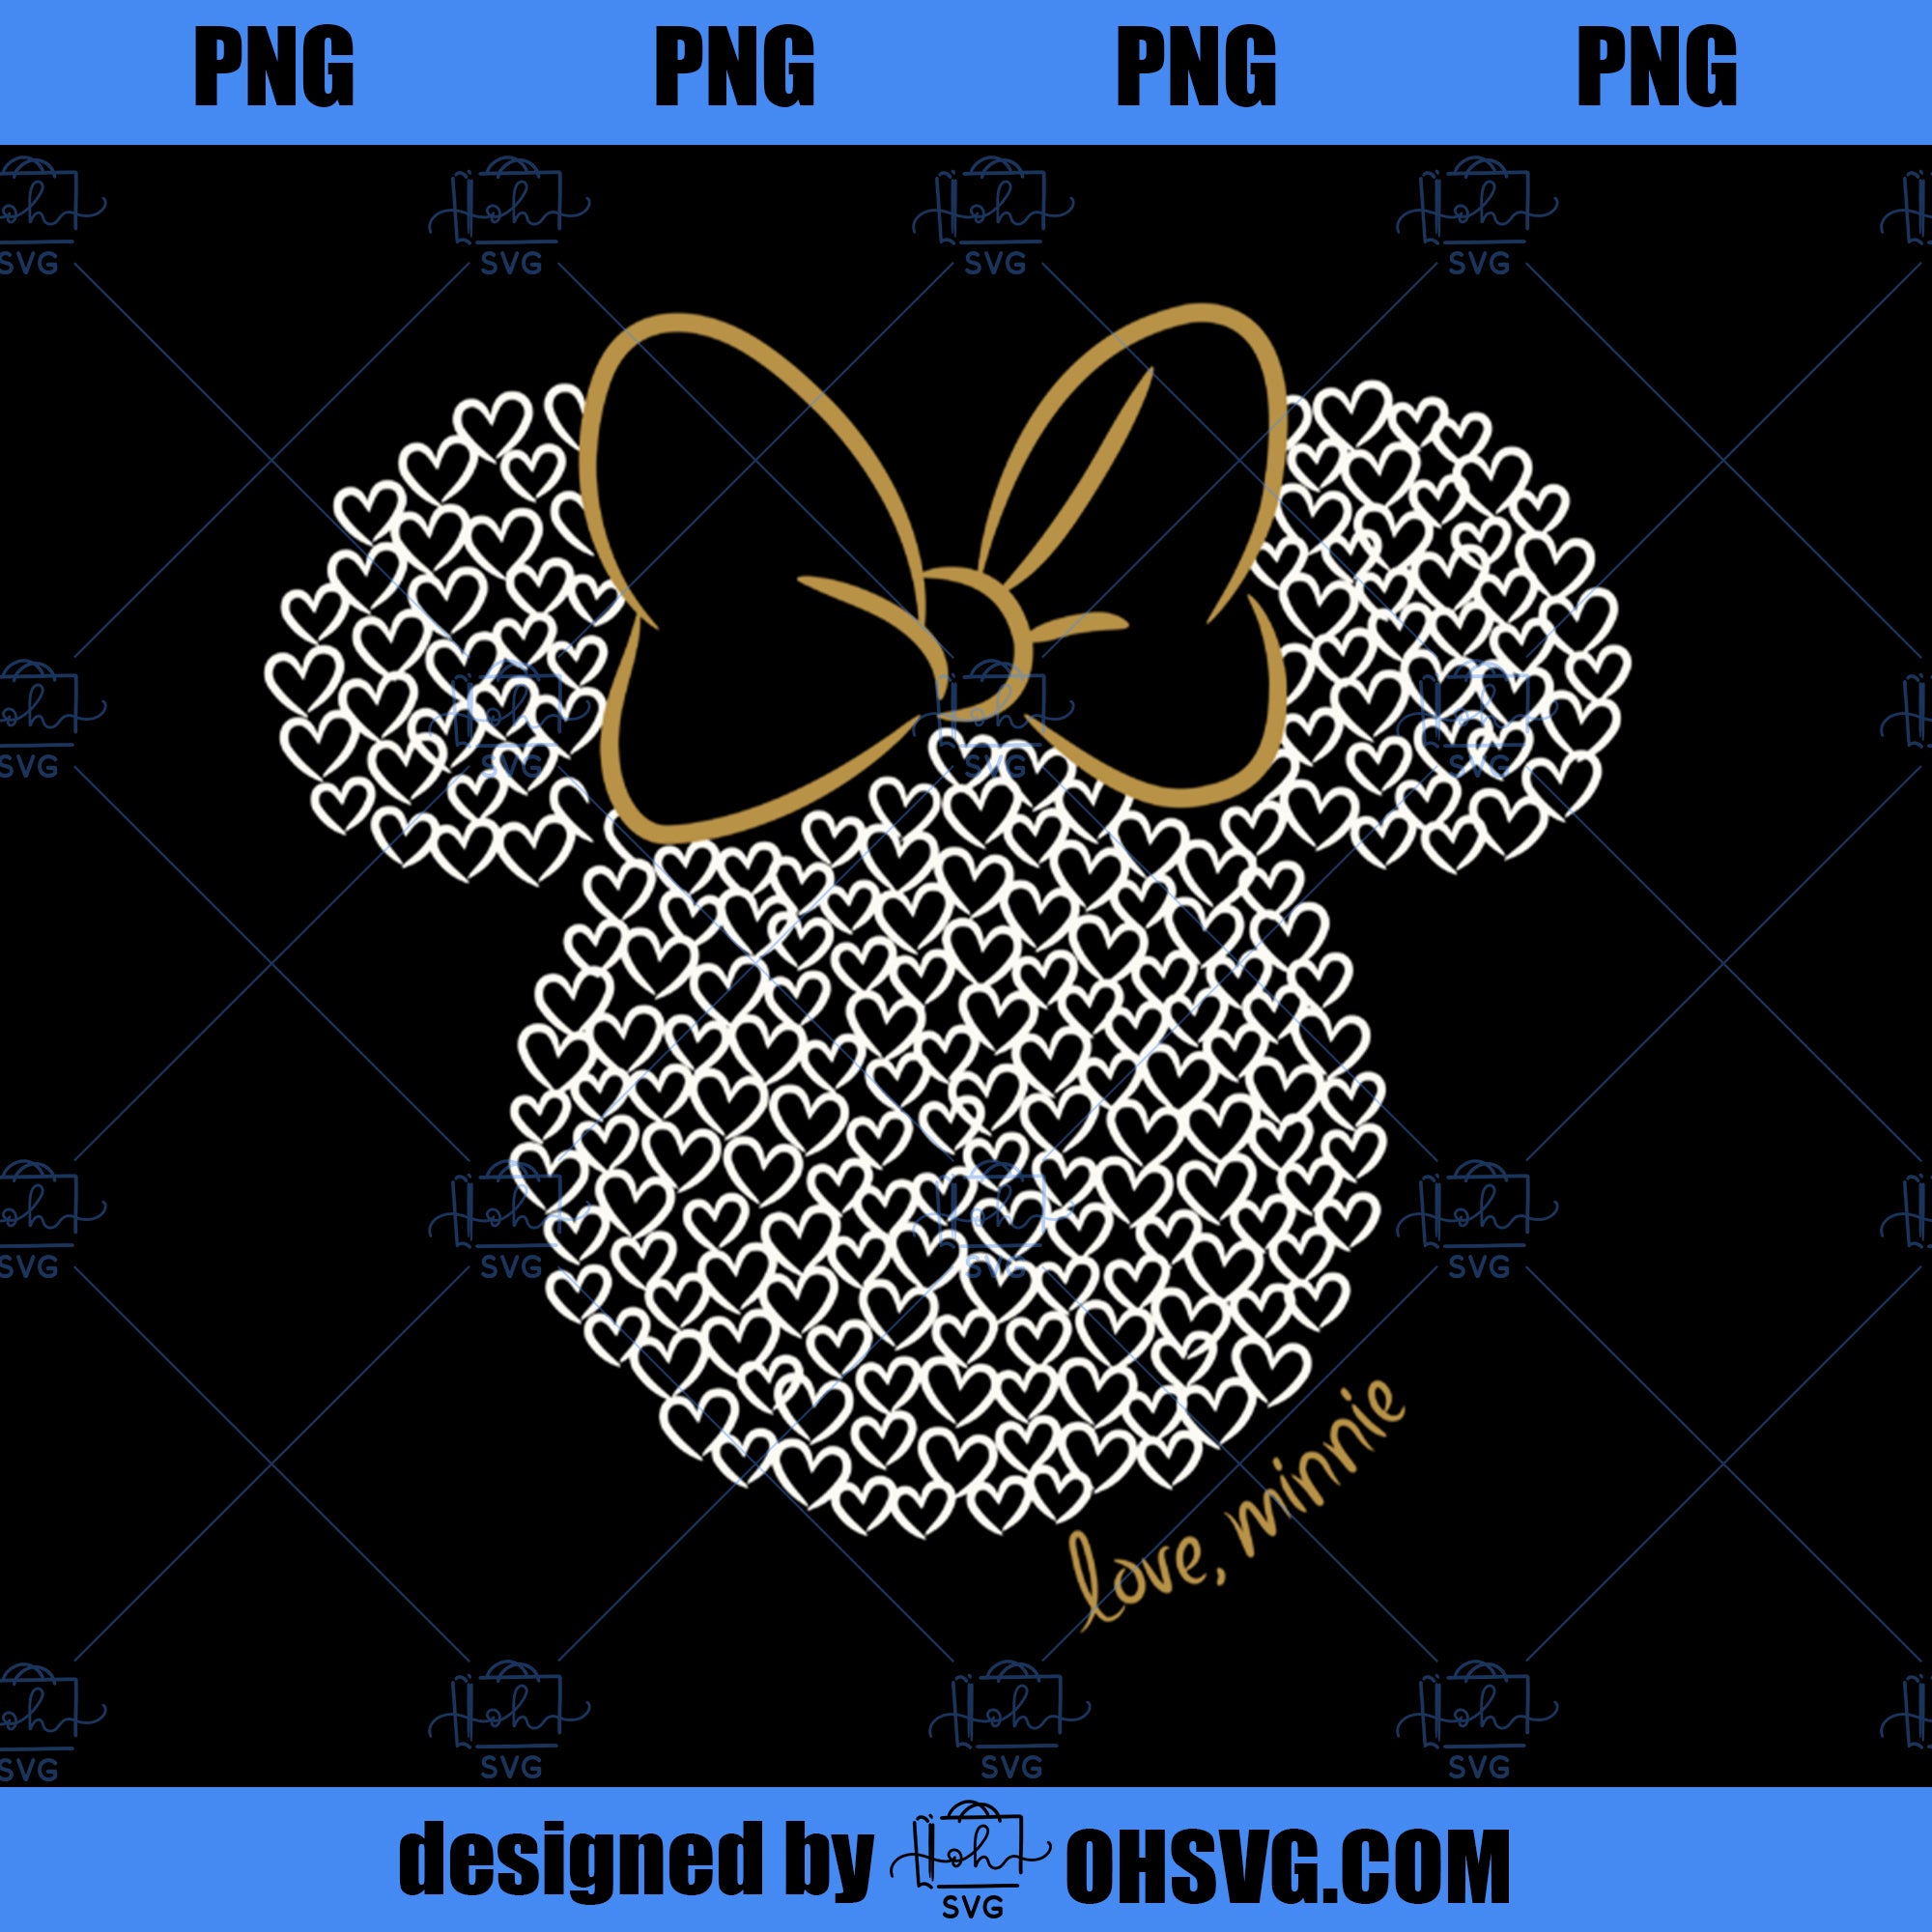 Disney Mickey and Friends Minnie Doodle Love Ears PNG, Disney PNG, Mickey Friends PNG